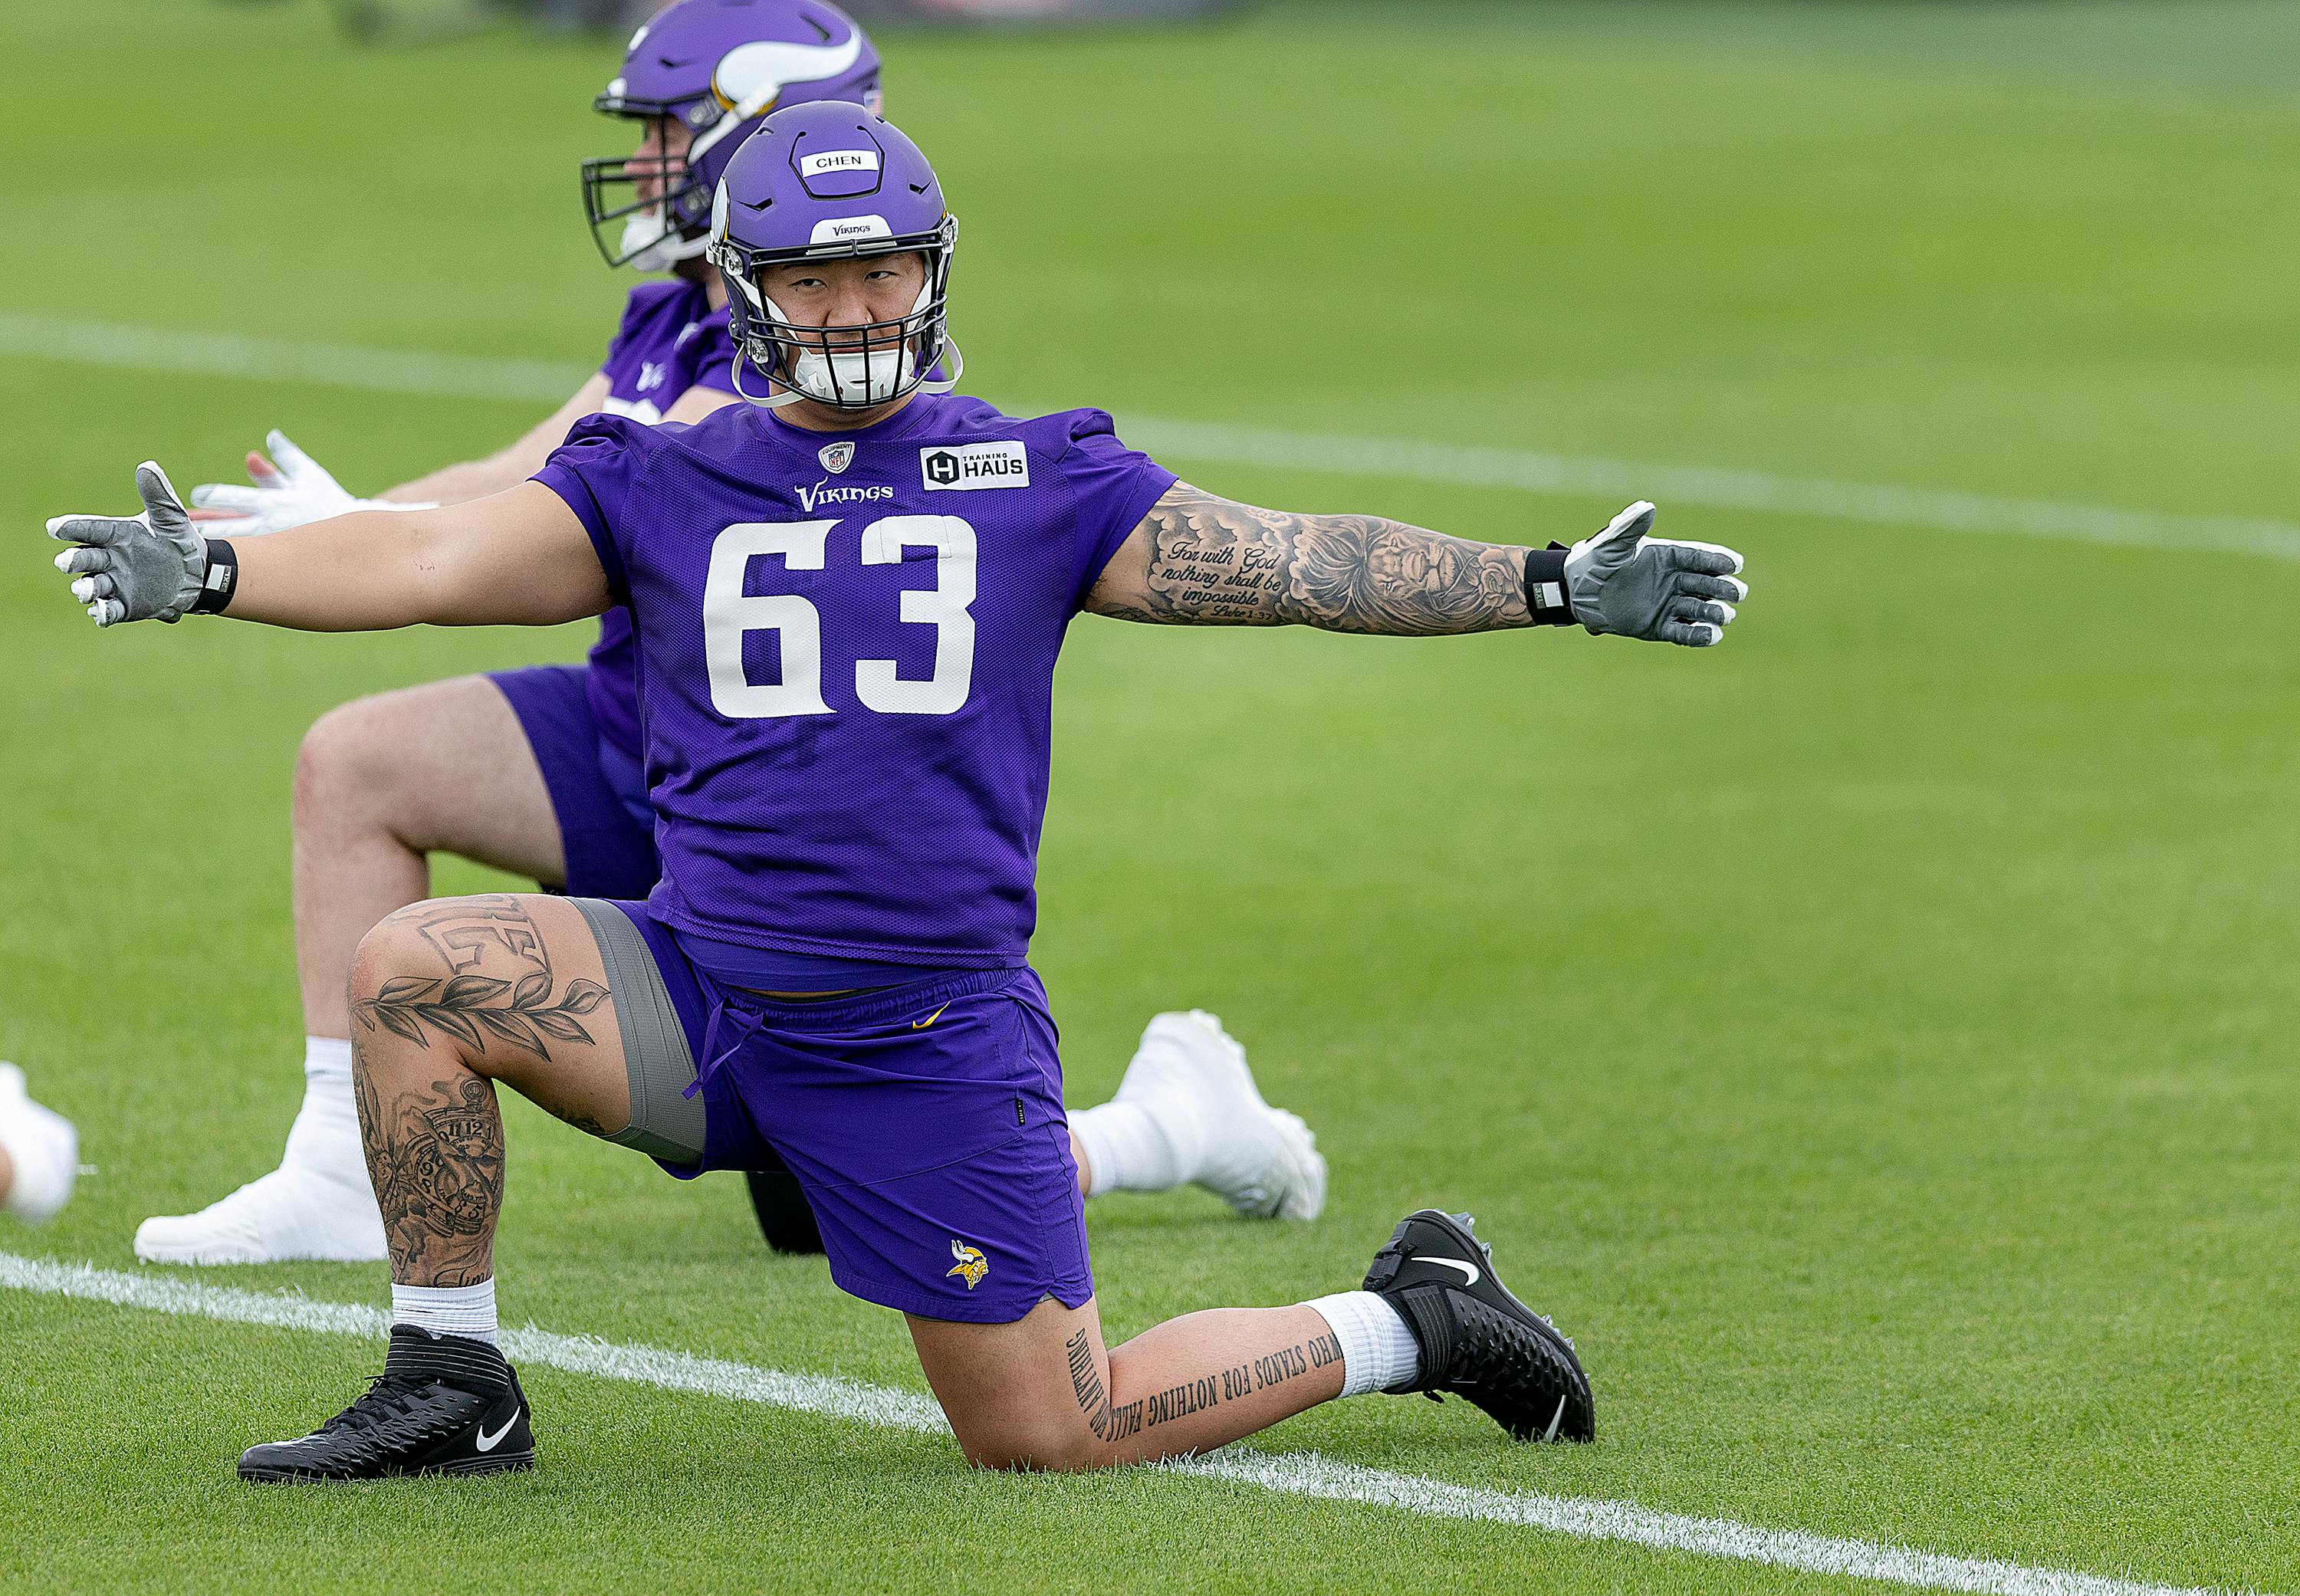 From sneaking onto the football team to signing with the Vikings, Jacky Chen has been an under-the-radar success